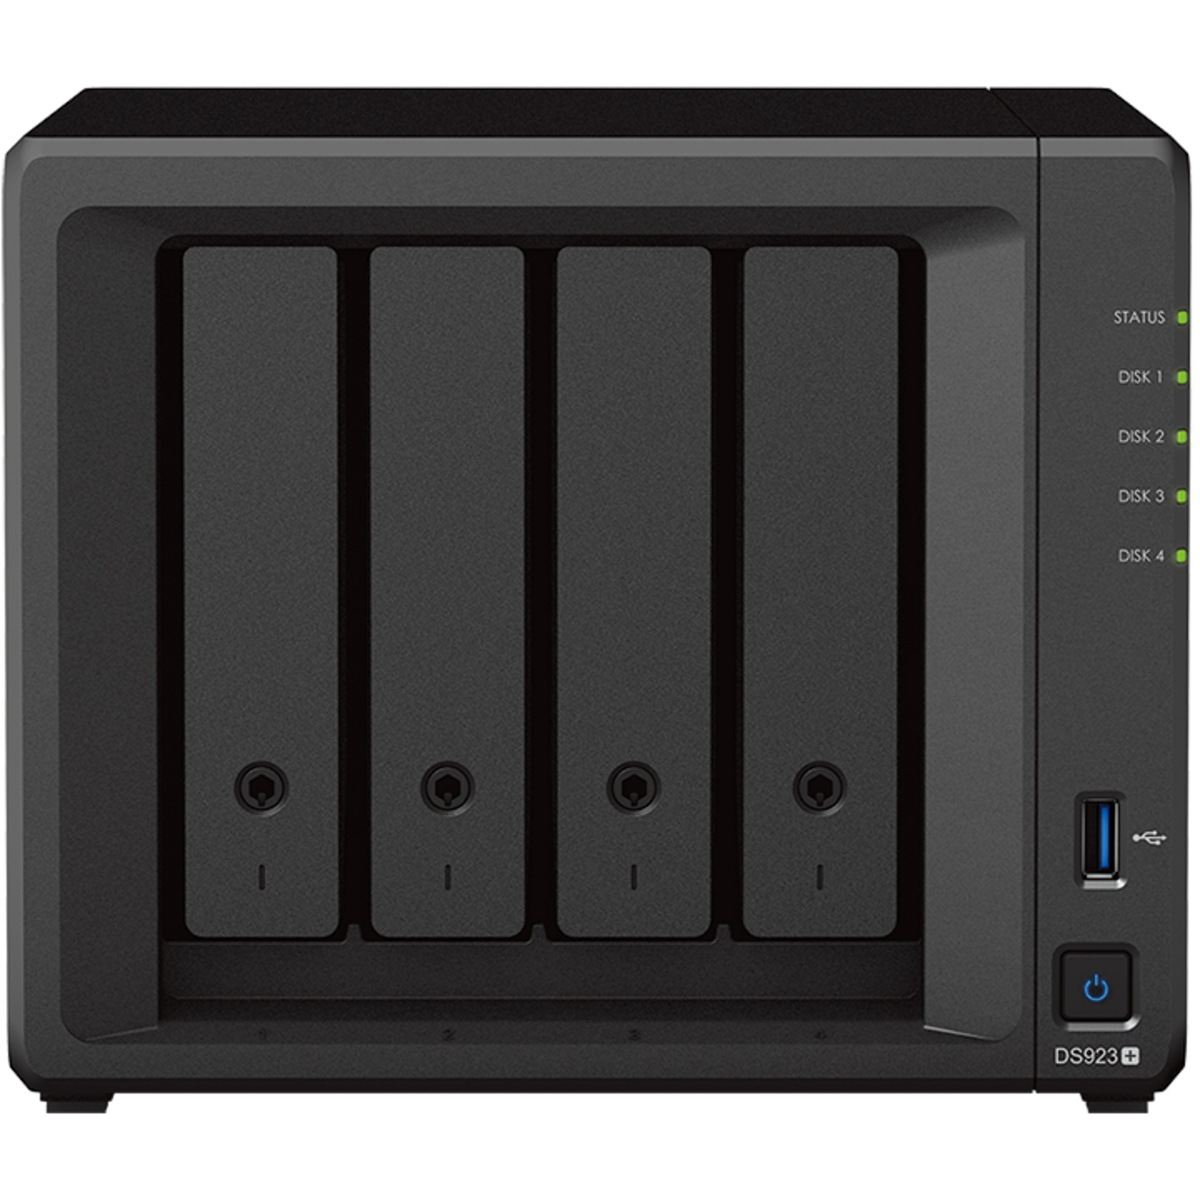 Synology DiskStation DS923+ 24tb 4-Bay Desktop Multimedia / Power User / Business NAS - Network Attached Storage Device 4x6tb Western Digital Red Plus WD60EFPX 3.5 5640rpm SATA 6Gb/s HDD NAS Class Drives Installed - Burn-In Tested - ON SALE - FREE RAM UPGRADE DiskStation DS923+